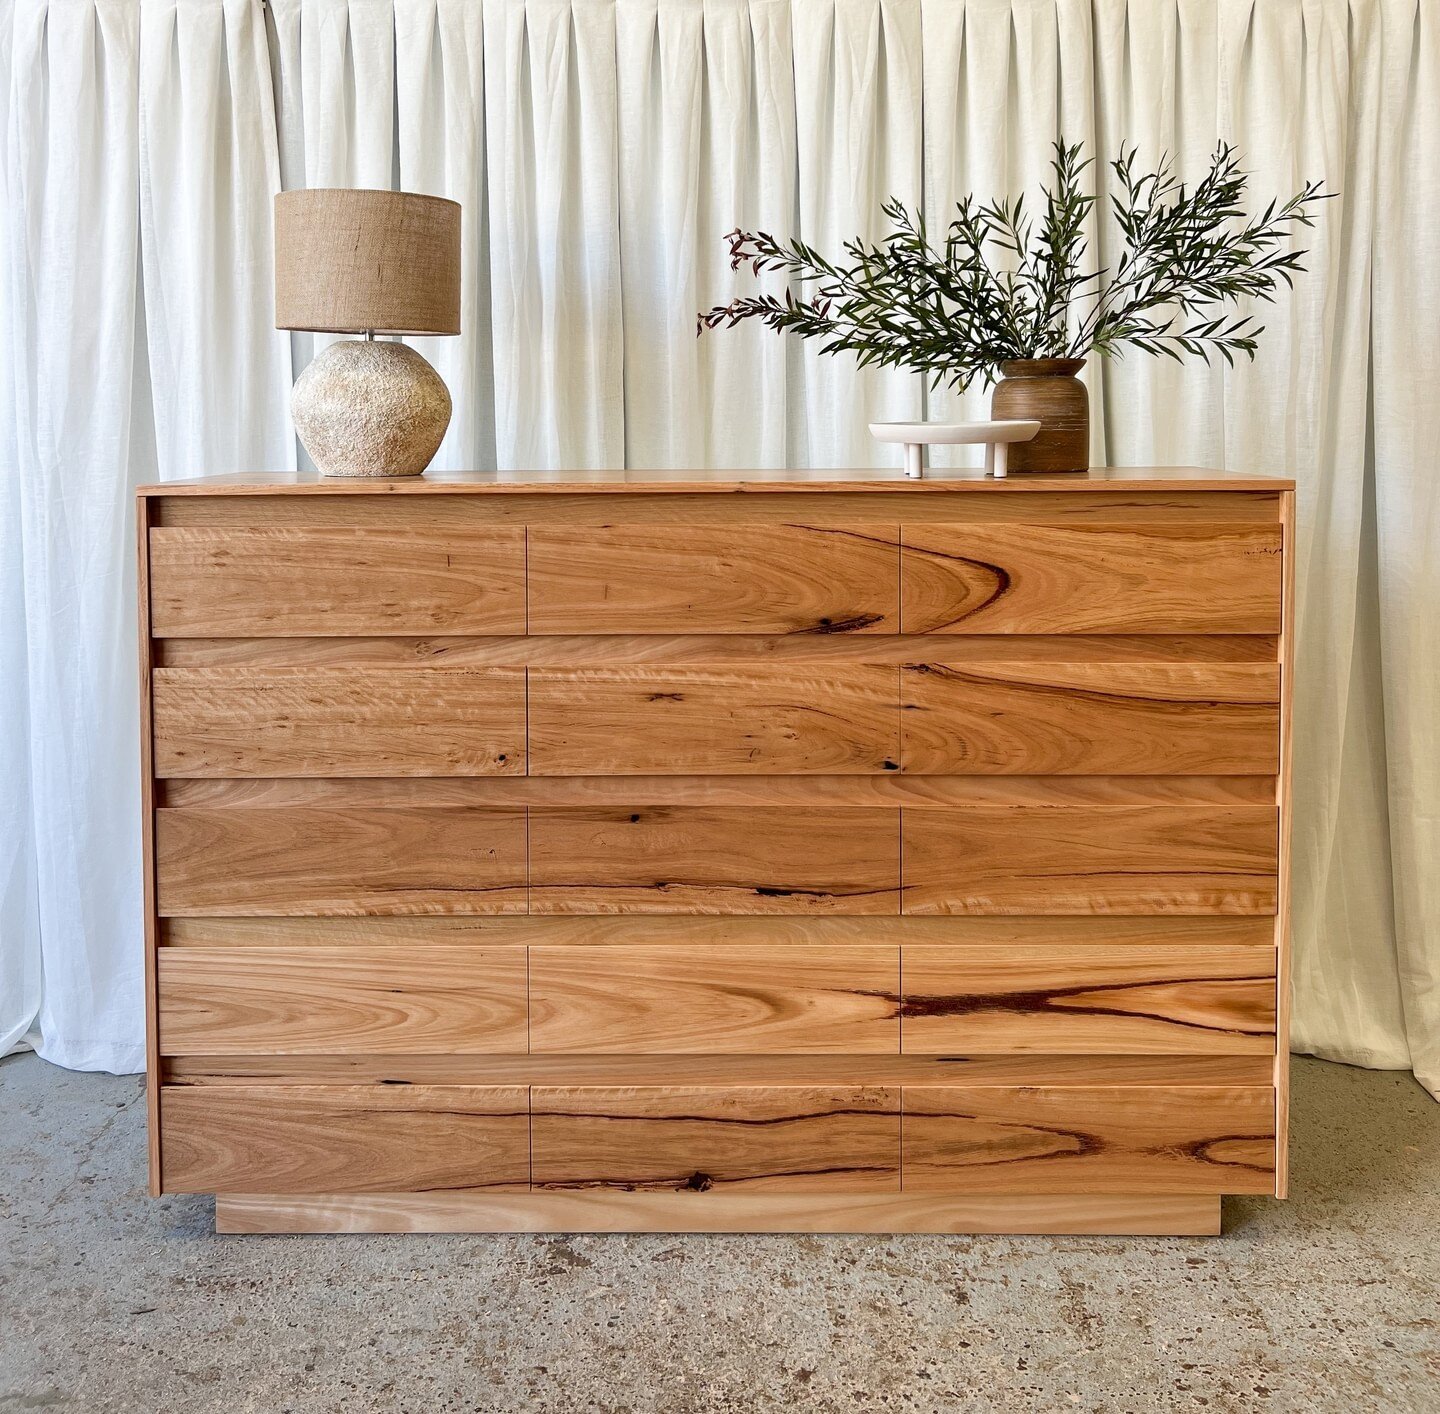 Practical furniture doesn't have to be drab and boring!! This beautiful tall boy has so much storage and it is absolutely beautiful.  Do you know someone who needs a 15 drawer tall boy like this for all their clothing?